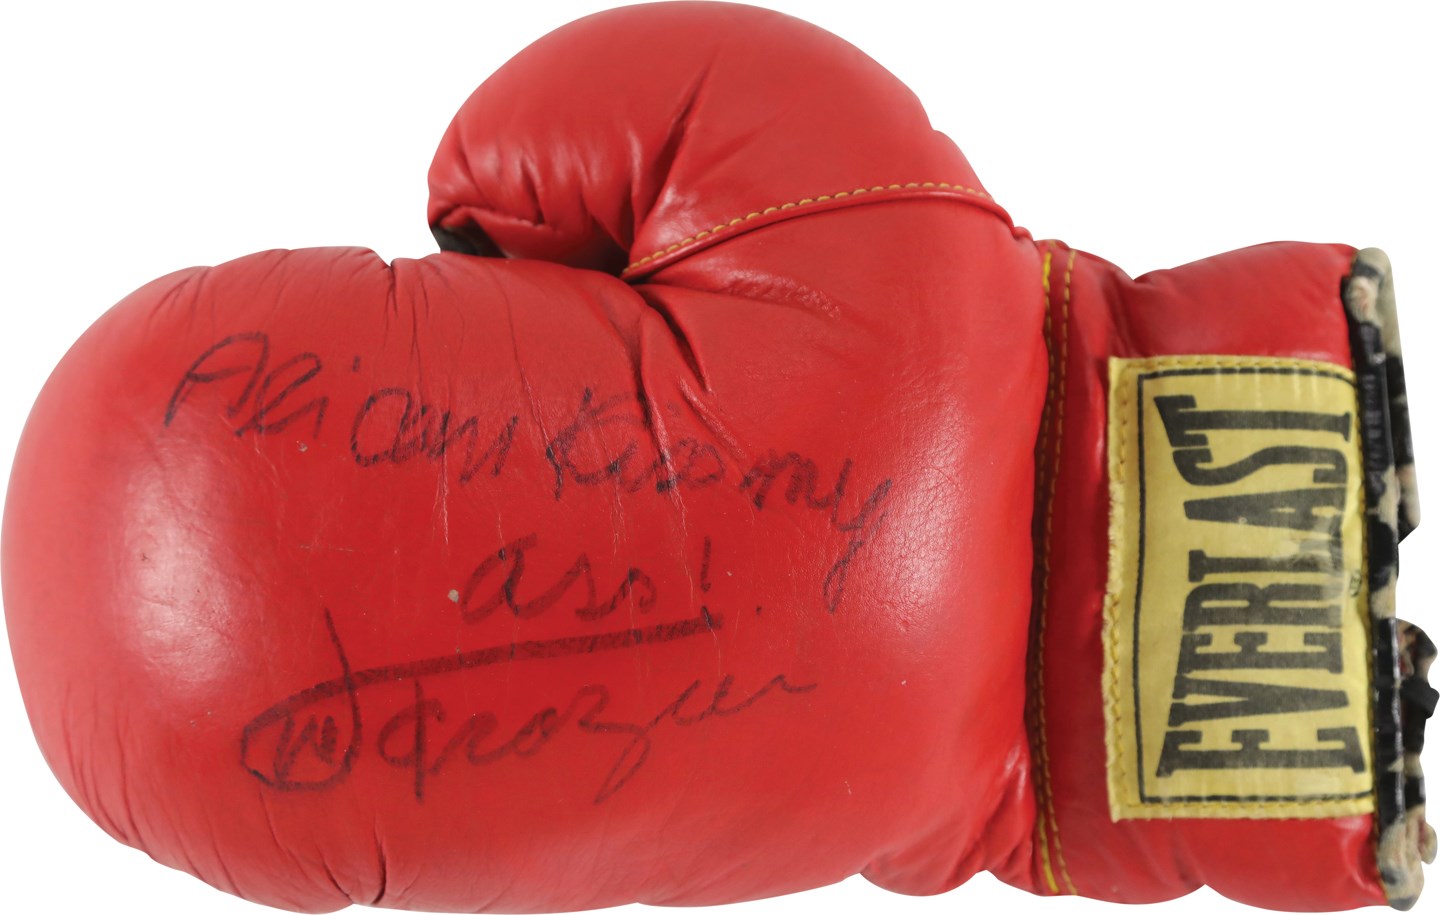 - Joe Frazier Signed Boxing Glove - Inscribed "Ali Can Kiss My Ass" (PSA)